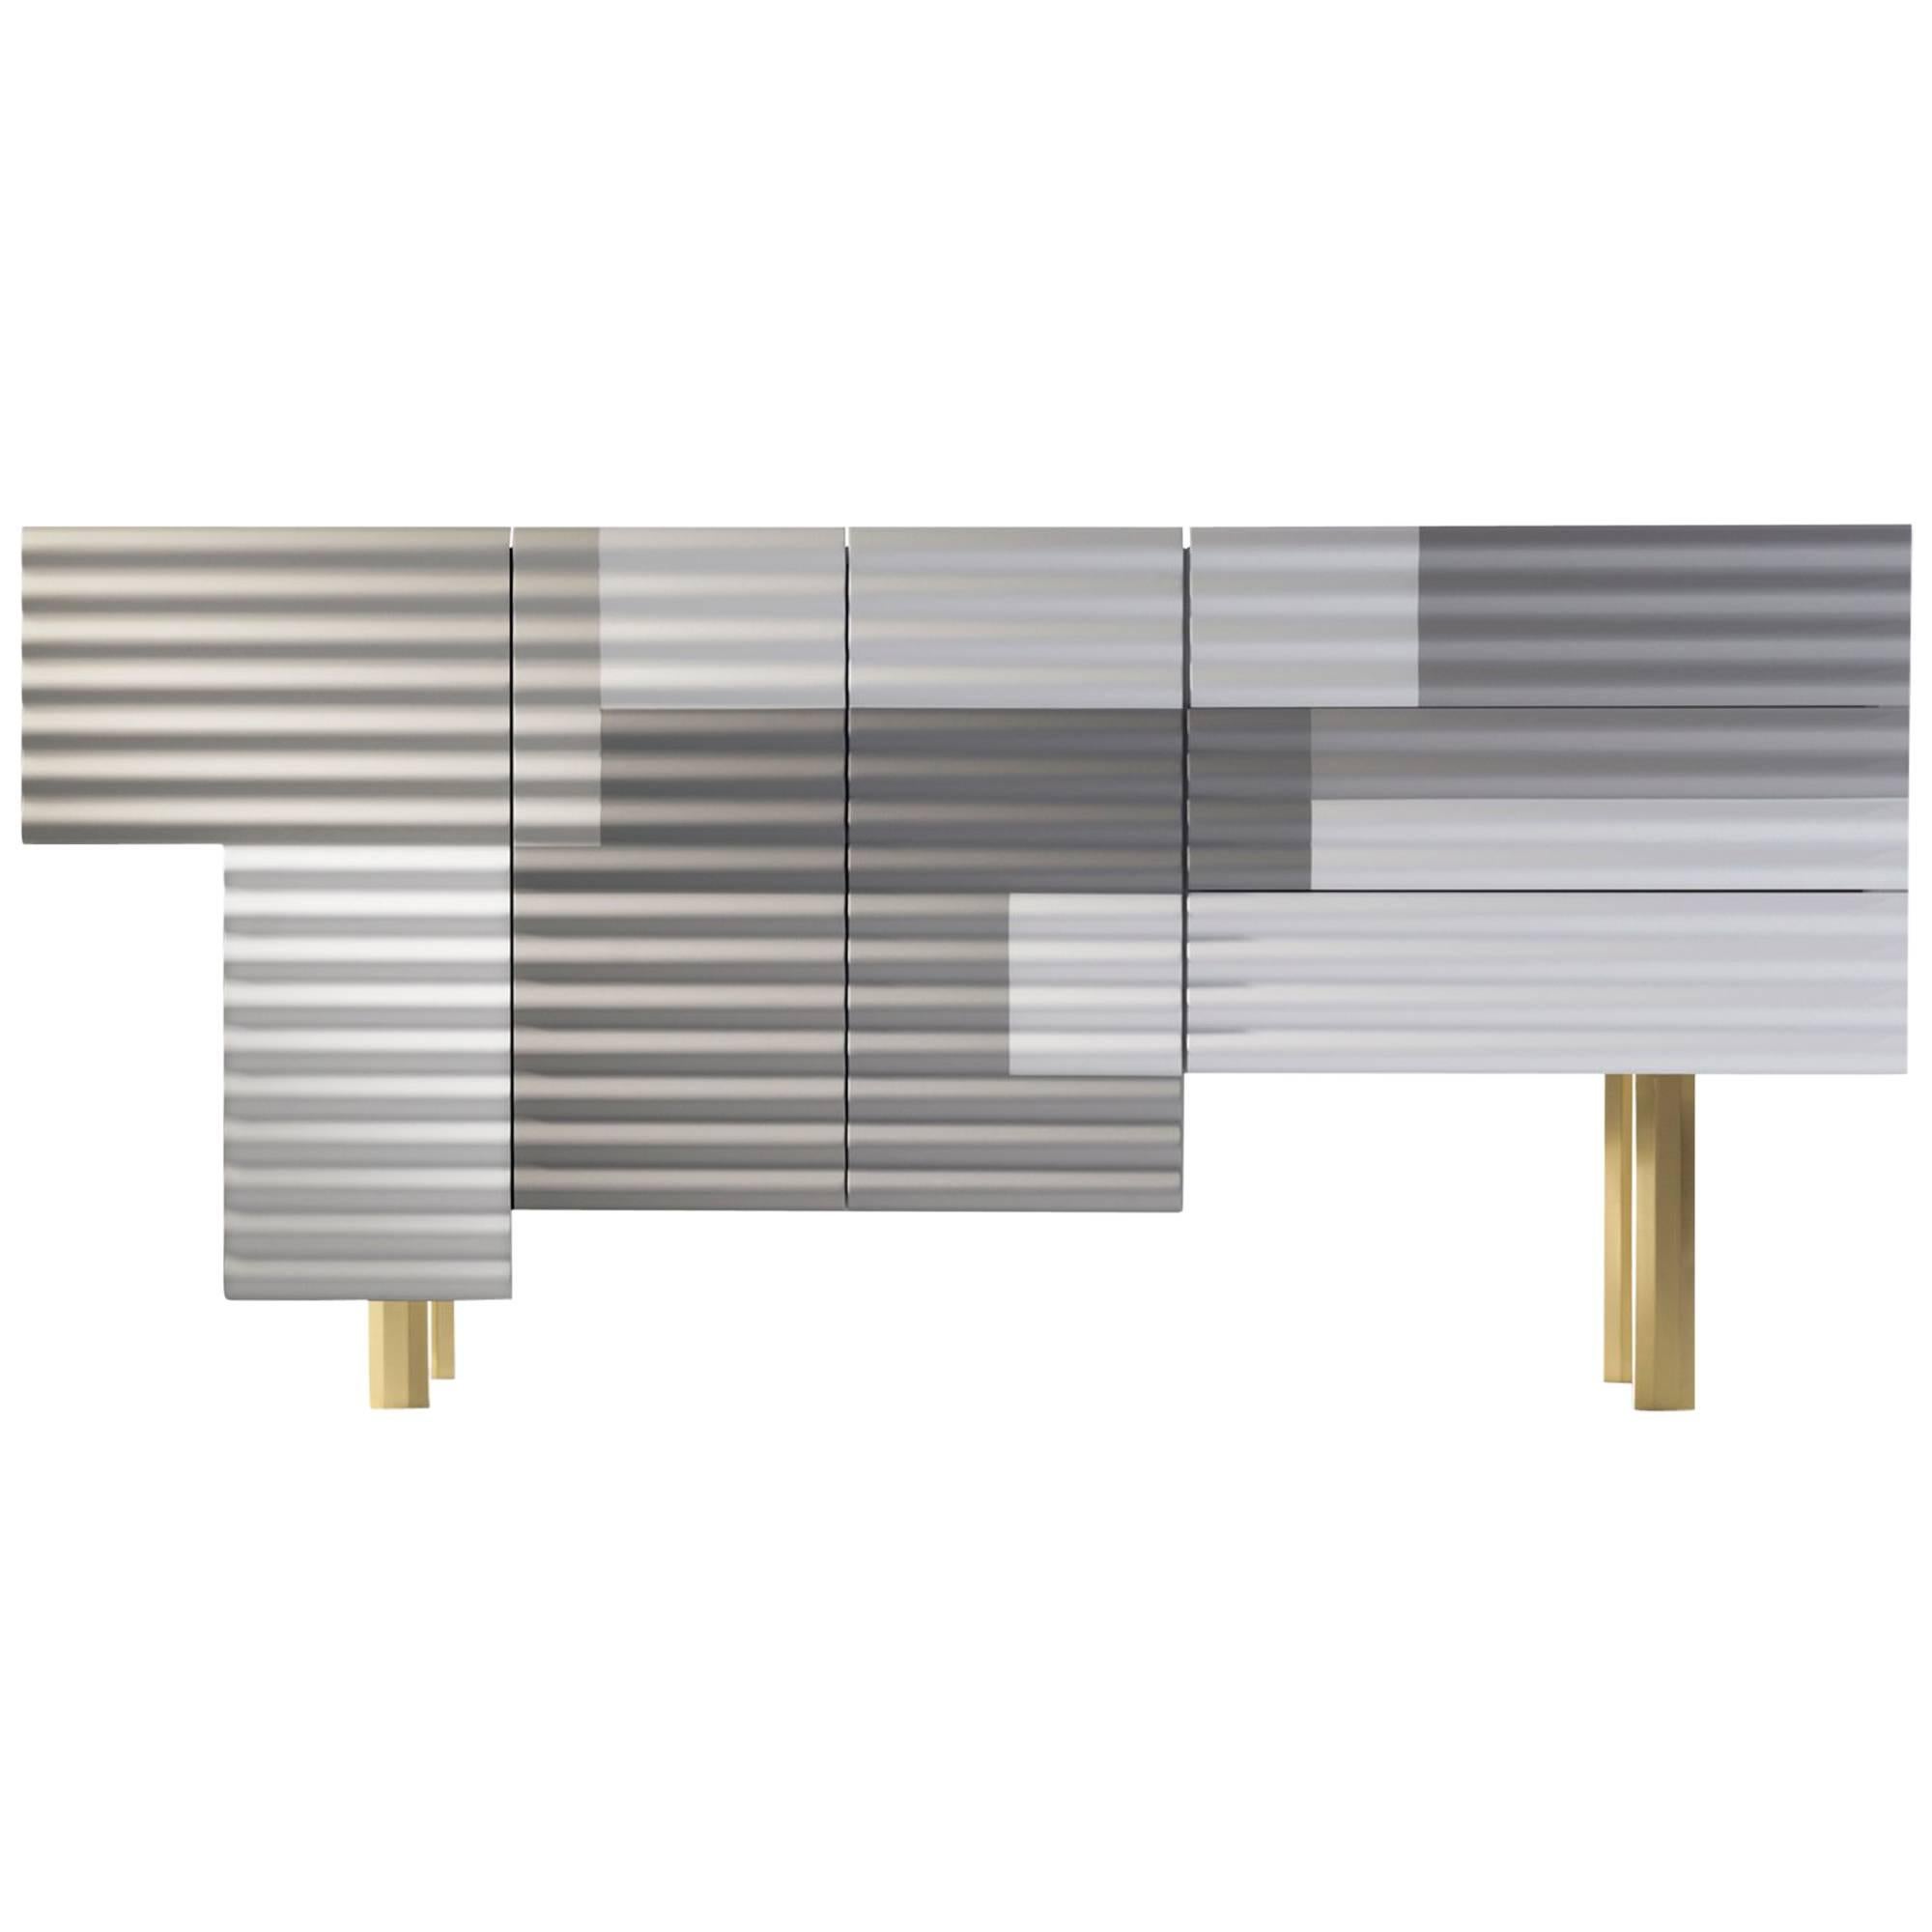 Contemporary sideboard "Shanti" folding doors, grey, white by Doshi Levin, Spain